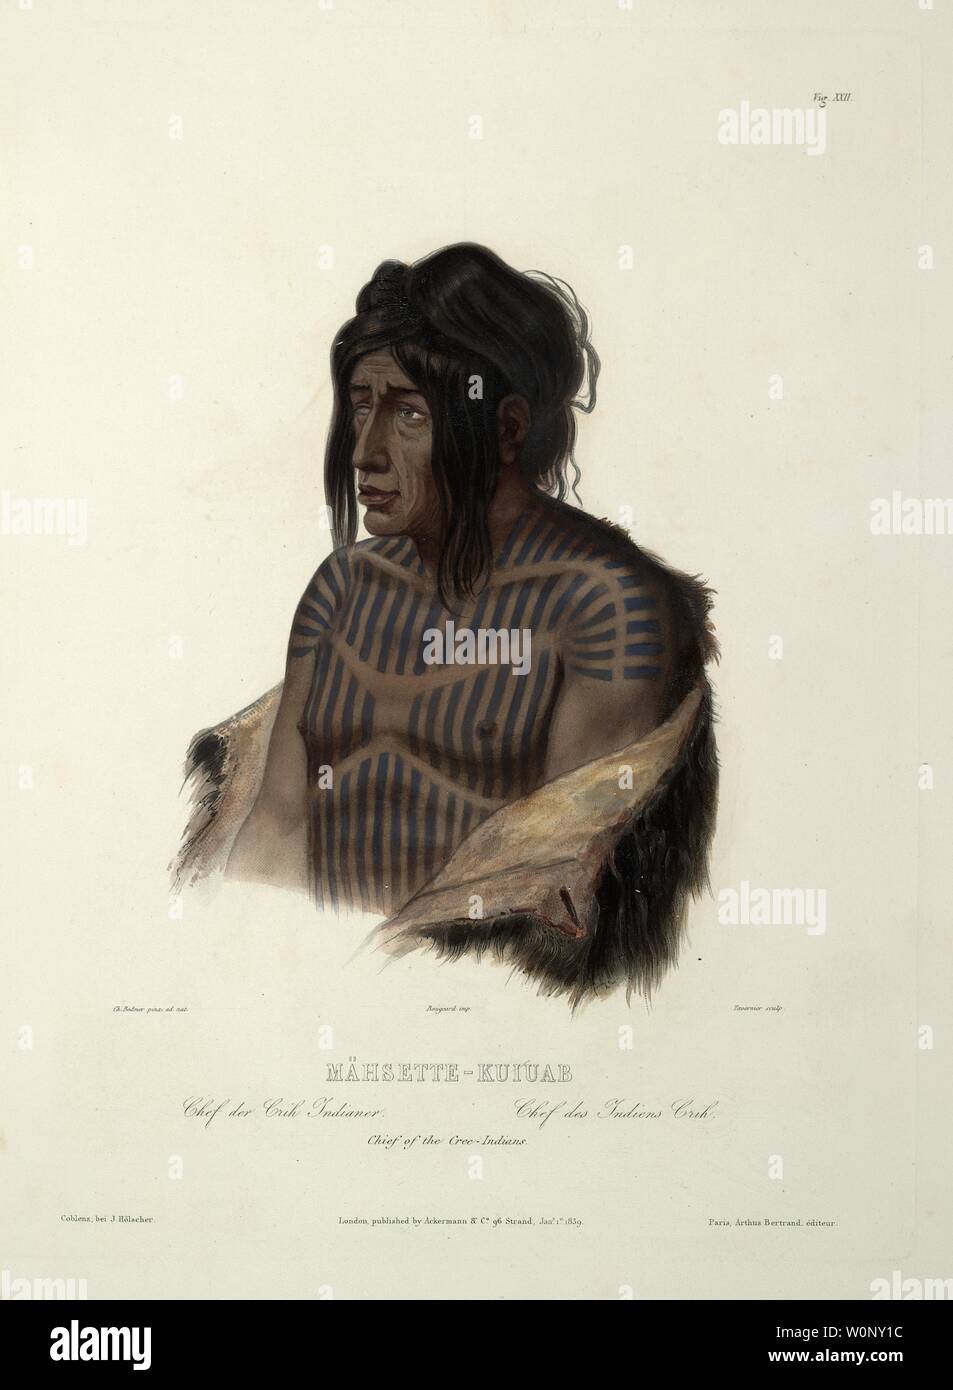 Mähsette-Kuiuab, Chief of the Cree--Indians - Karl Bodmer aquatint from Travels in the Interior of North America (Voyage dans l’intérieur) Stock Photo